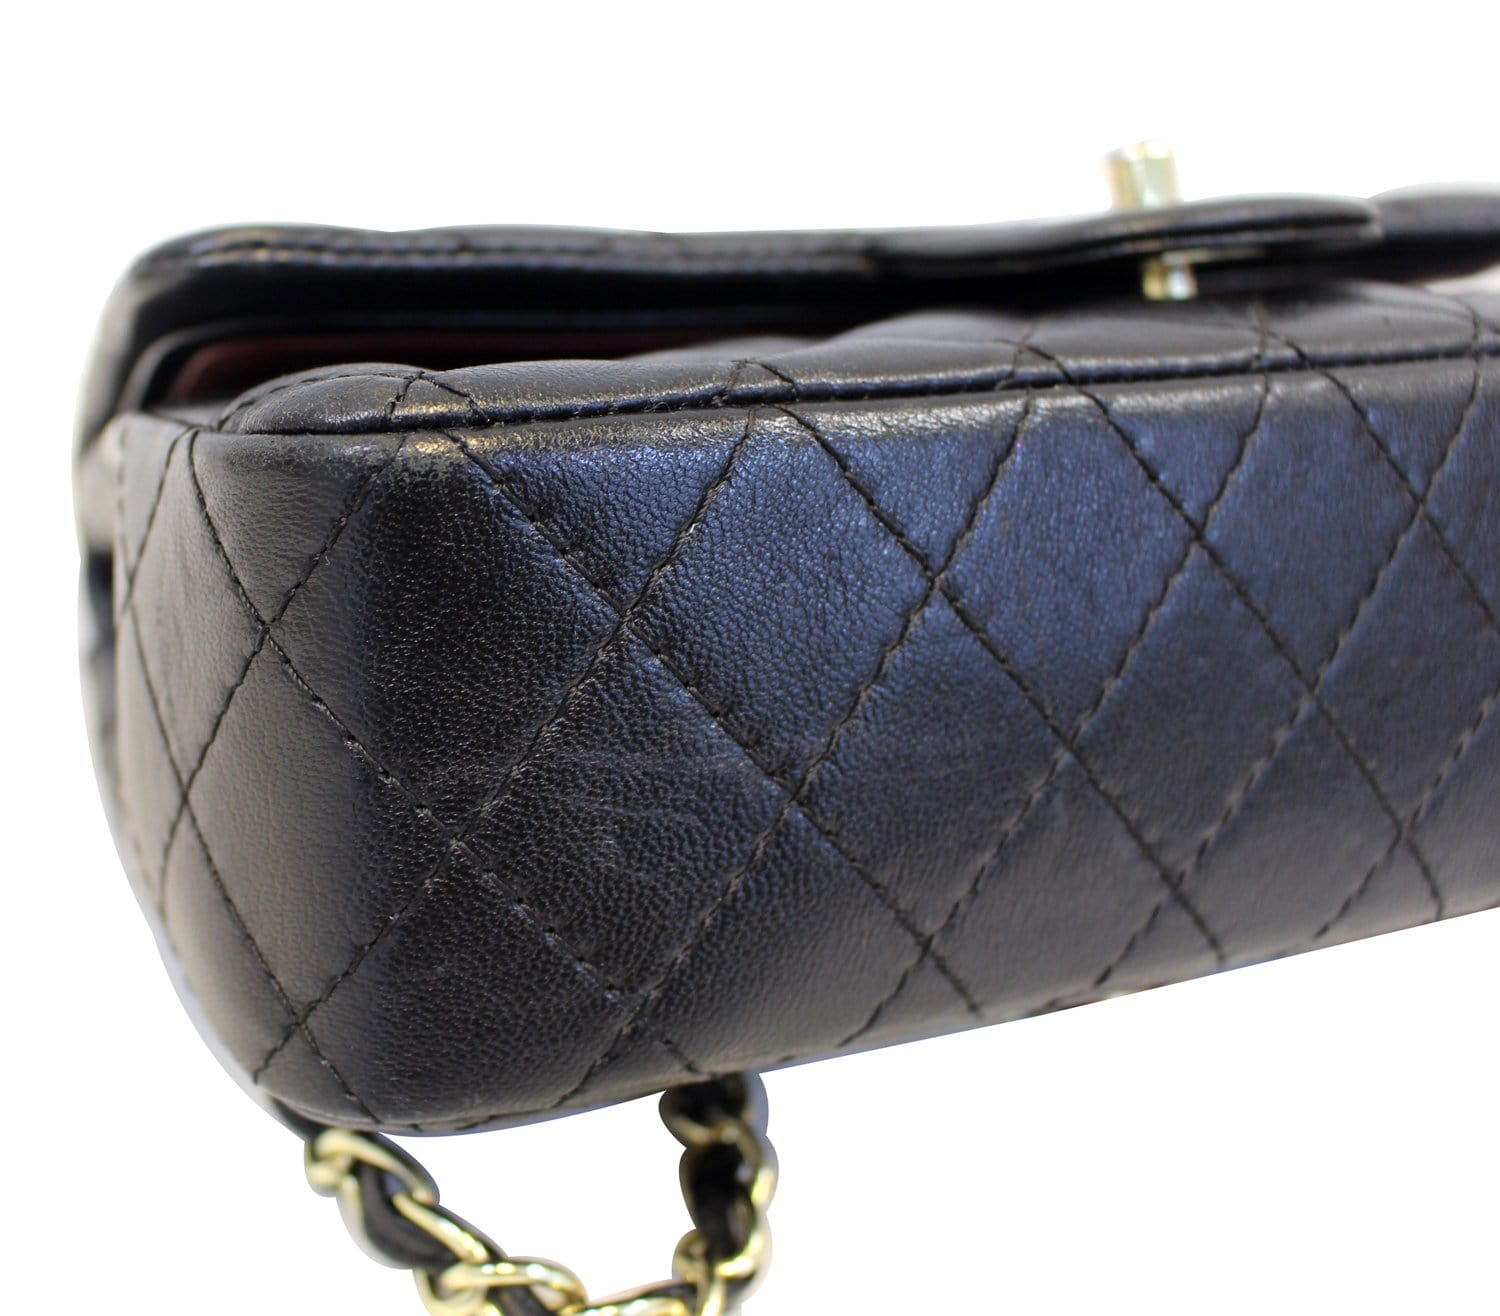 quilted chanel flap bag black